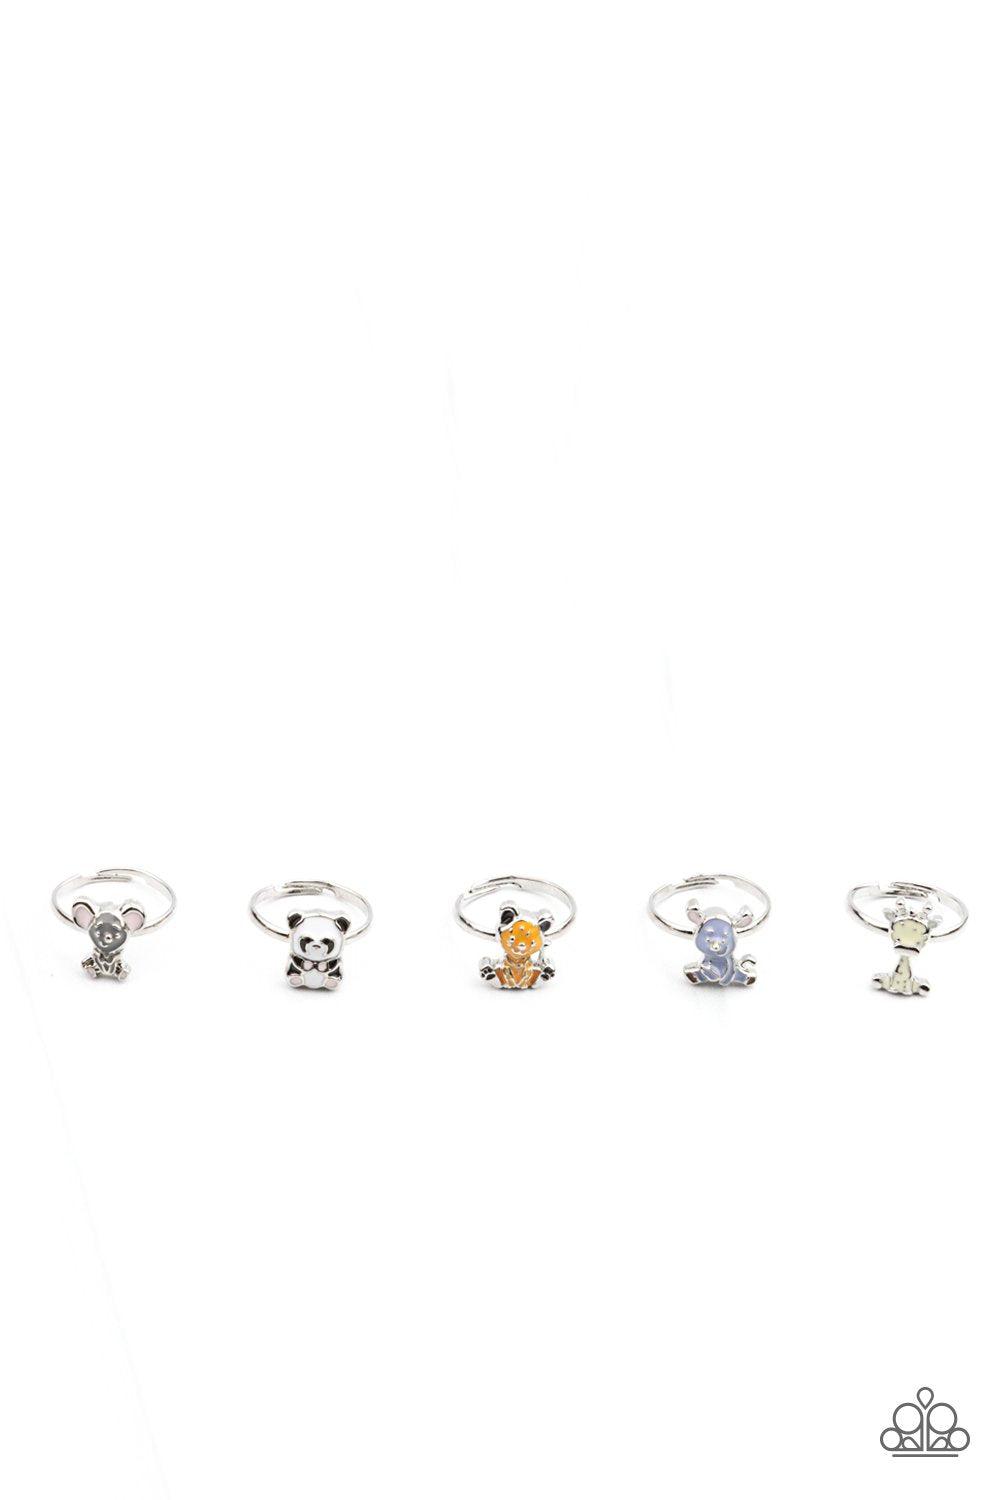 Starlet Shimmer Children&#39;s Zoo Animal Rings - Paparazzi Accessories (set of 5) - Full set -CarasShop.com - $5 Jewelry by Cara Jewels